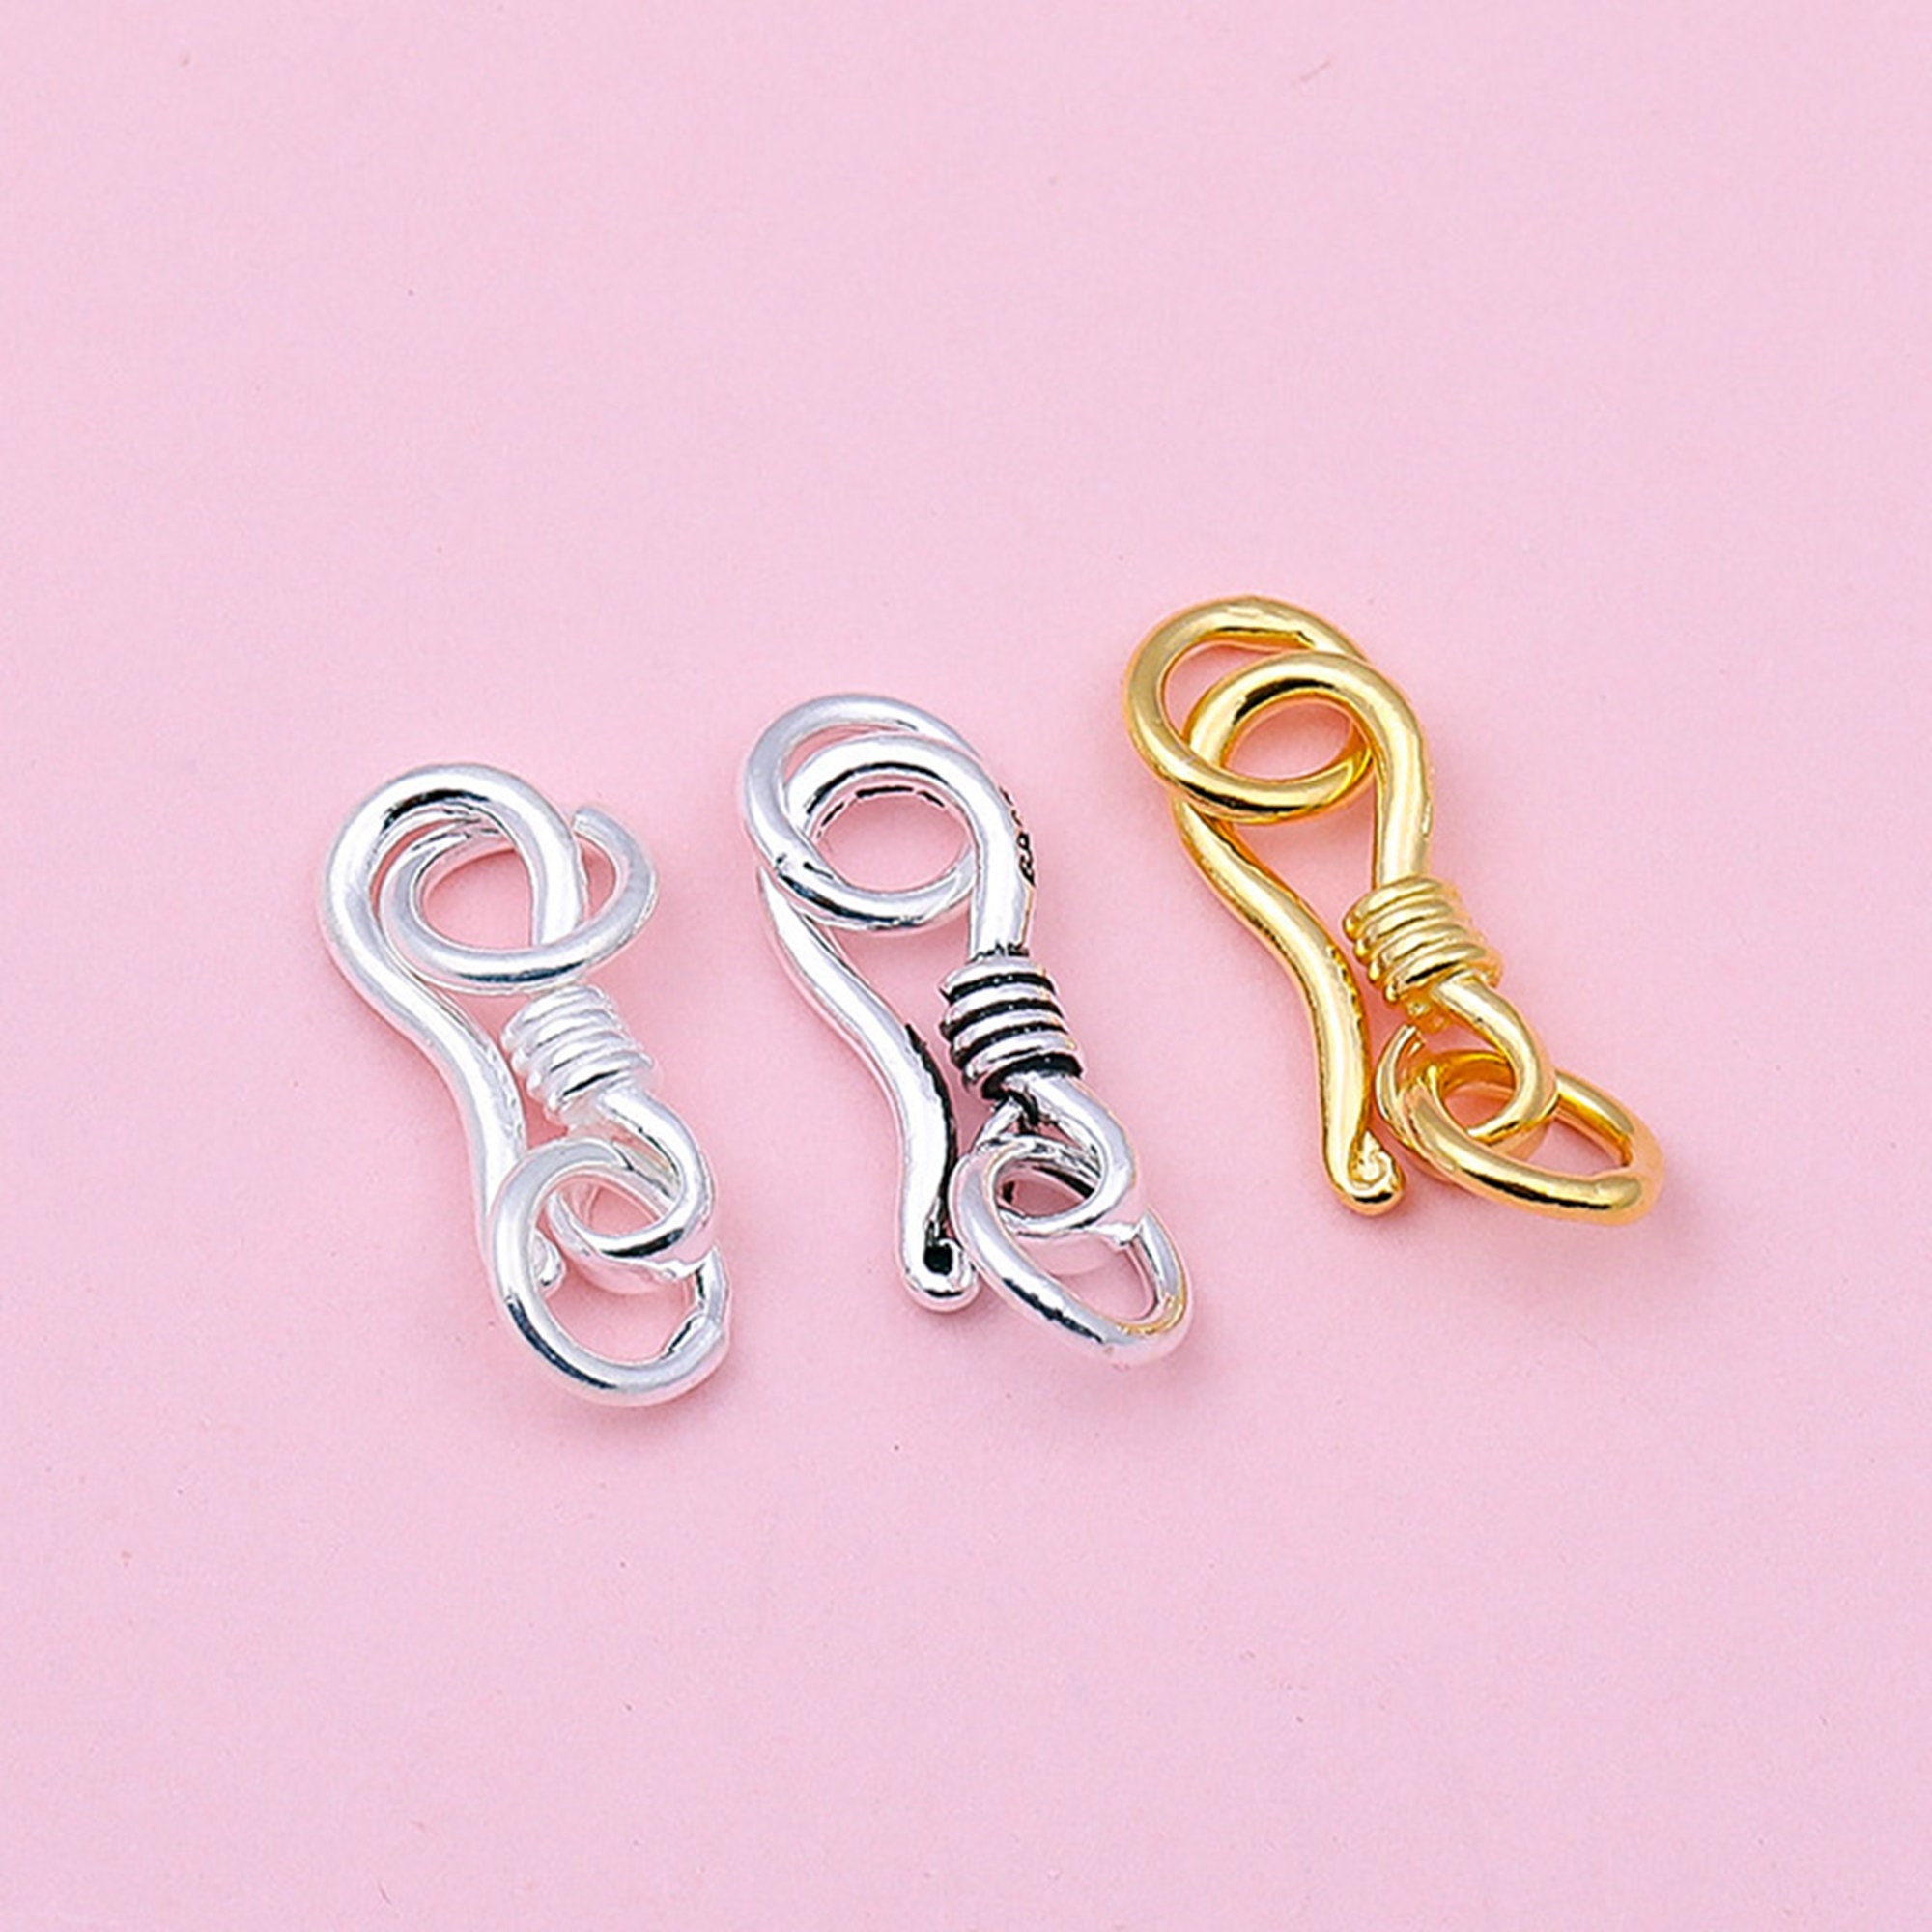 2 Pcs Pendant Clasp for Jewelry Making Necklace Bracelet,pendant  Hook,connector Supplies,sterling Silver,solid Pure Silver Clasp 